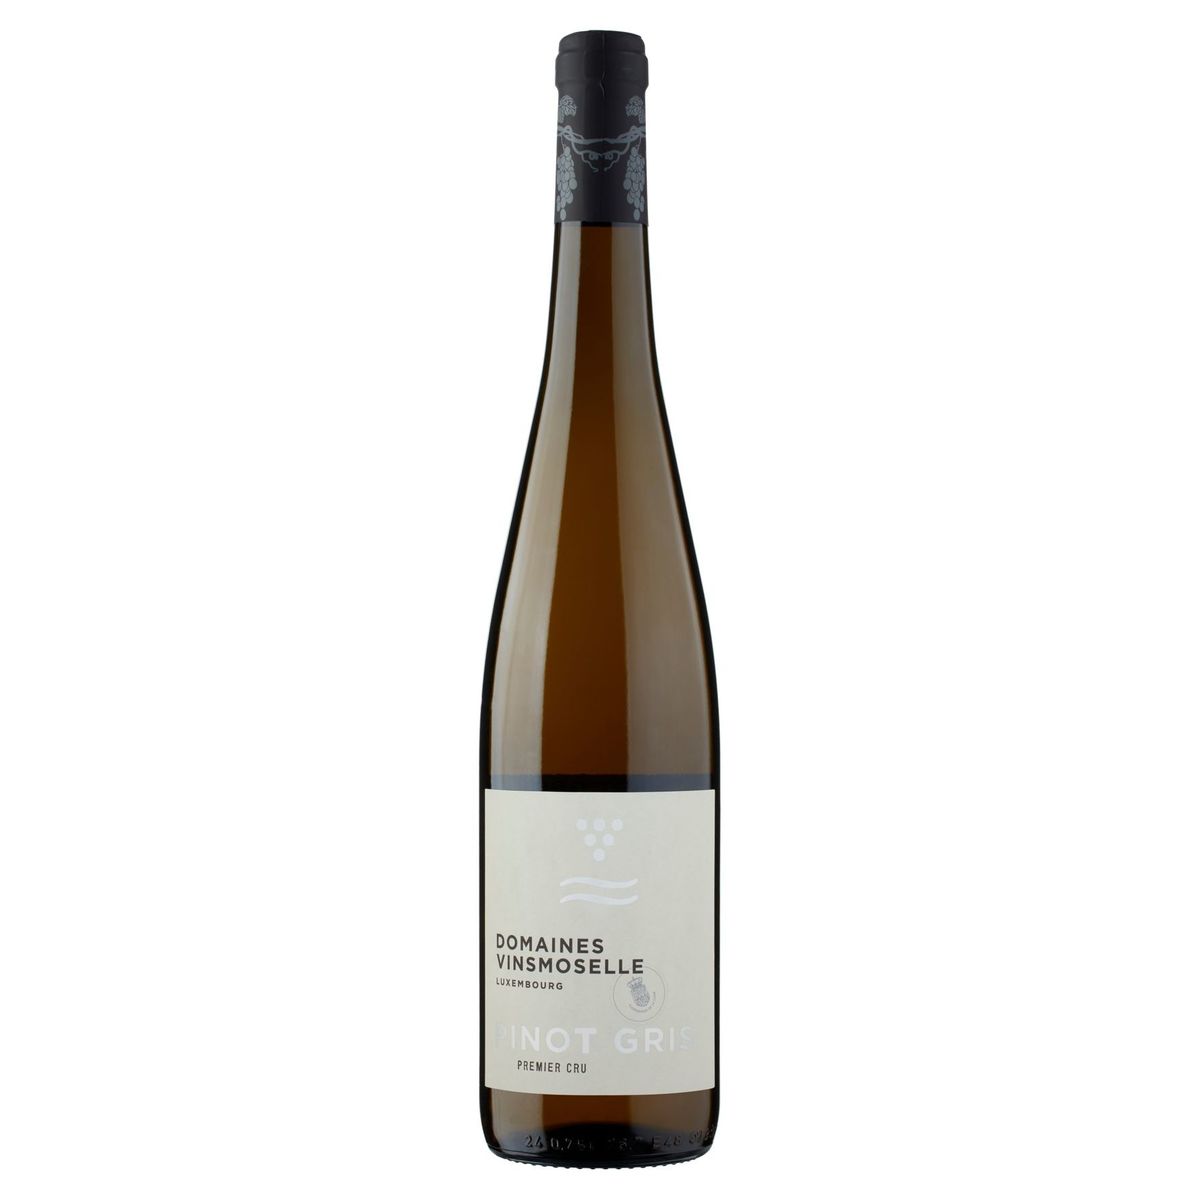 Luxembourg Domaines Vinsmoselle Pinot Gris 75 cl